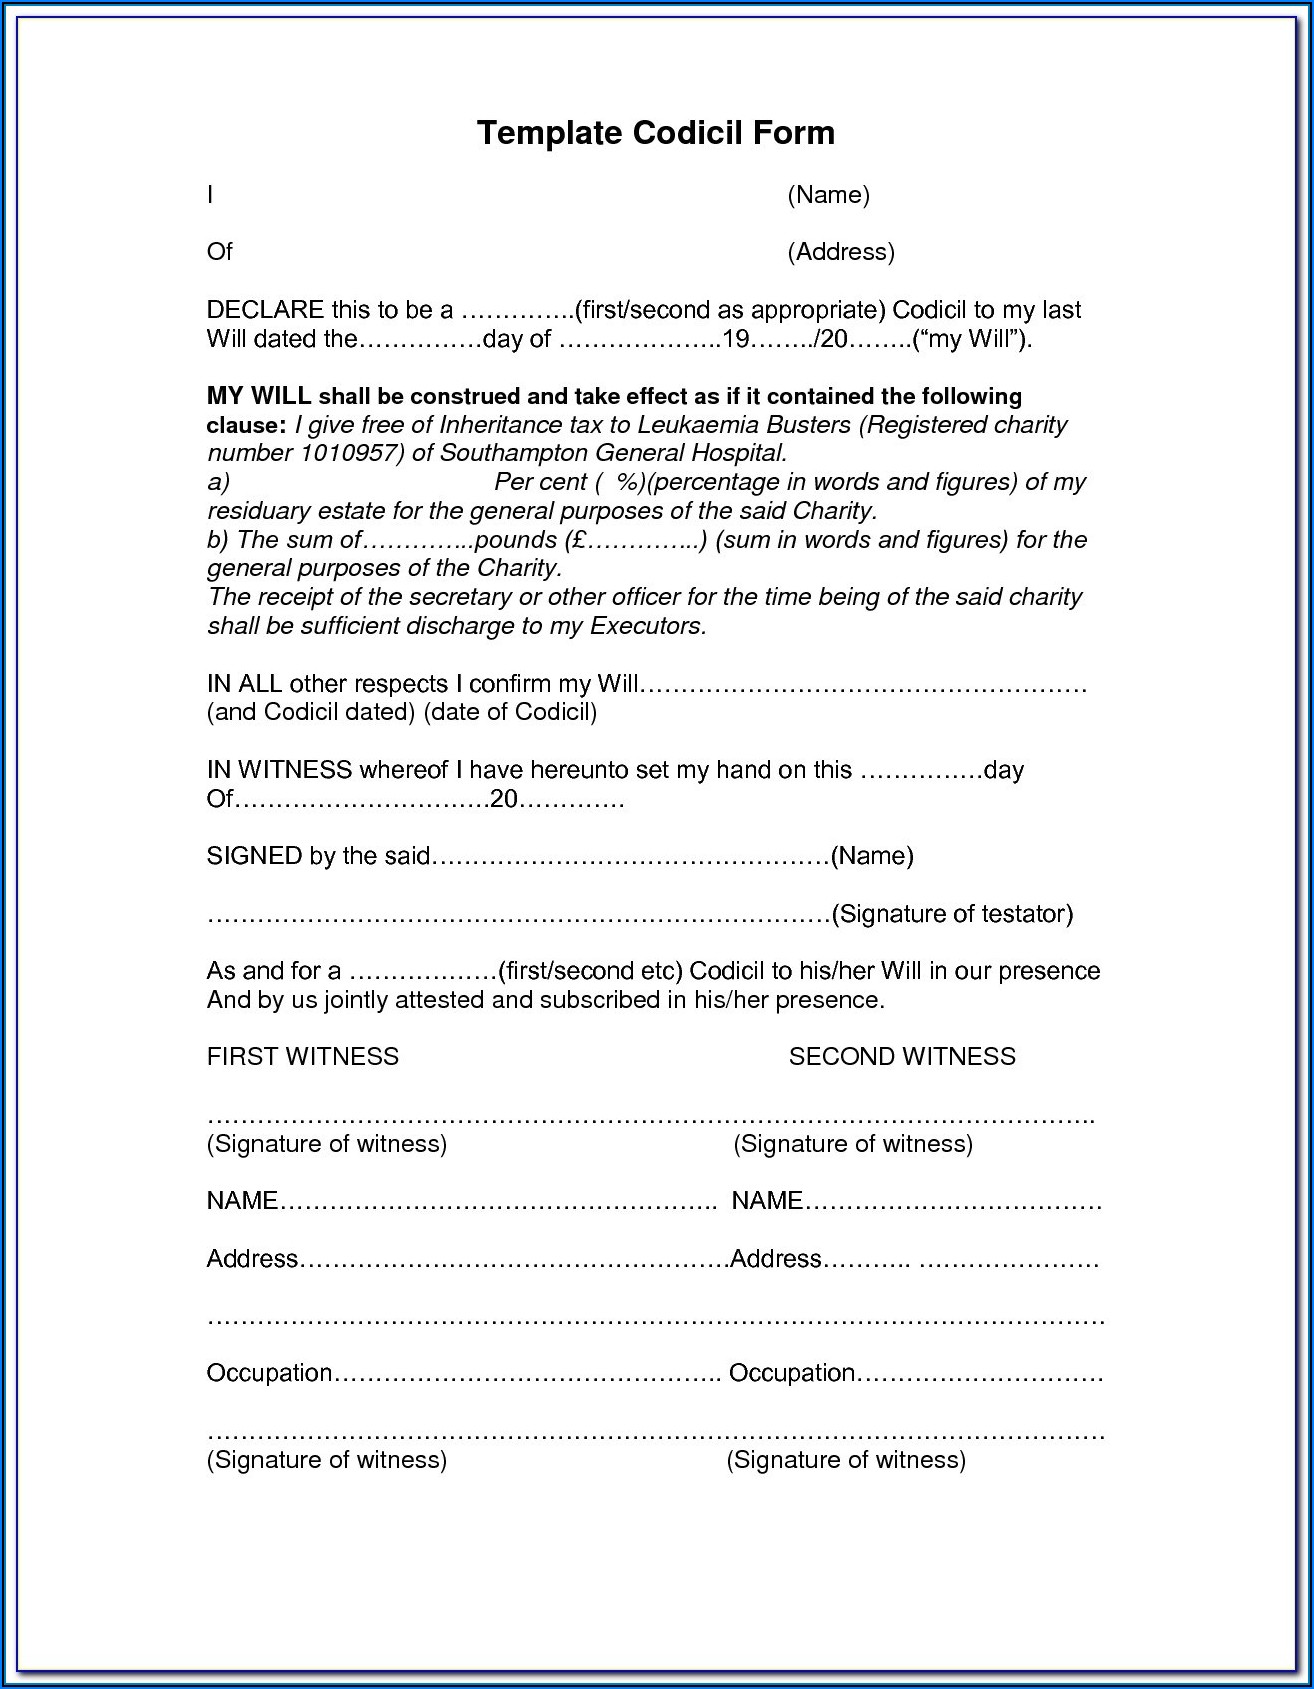 printable-last-will-and-testament-forms-alberta-printable-forms-free-online